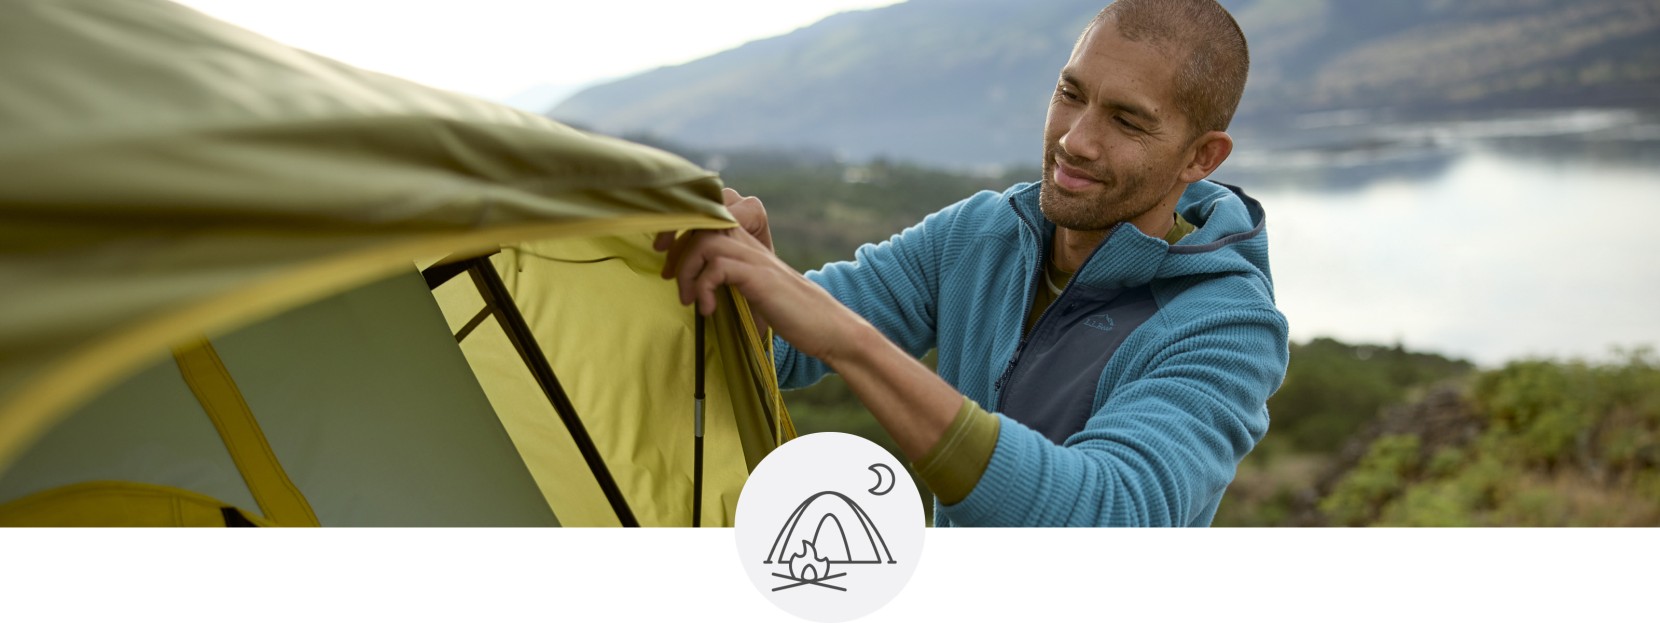 Close-up of a man setting up a tent, a lake and mountains in the background.